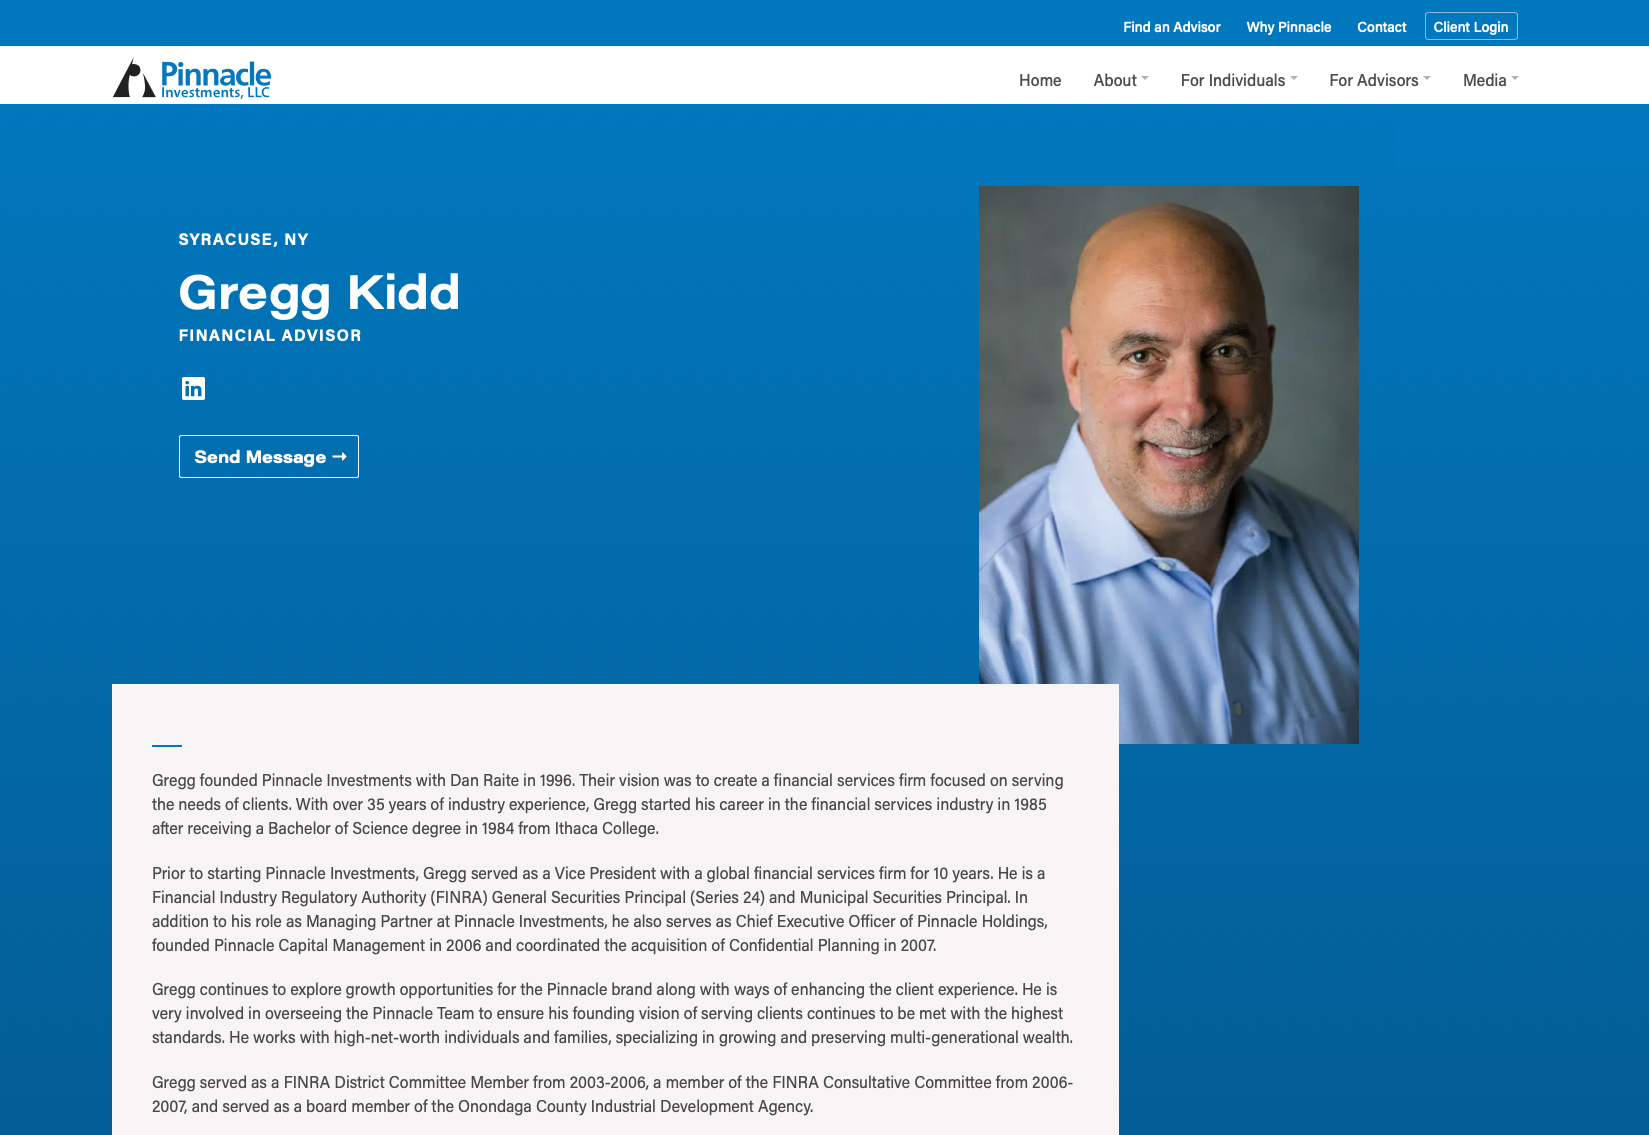 Pinnacle Investments website showing Founder, Gregg Kidd's profile page on a desktop view